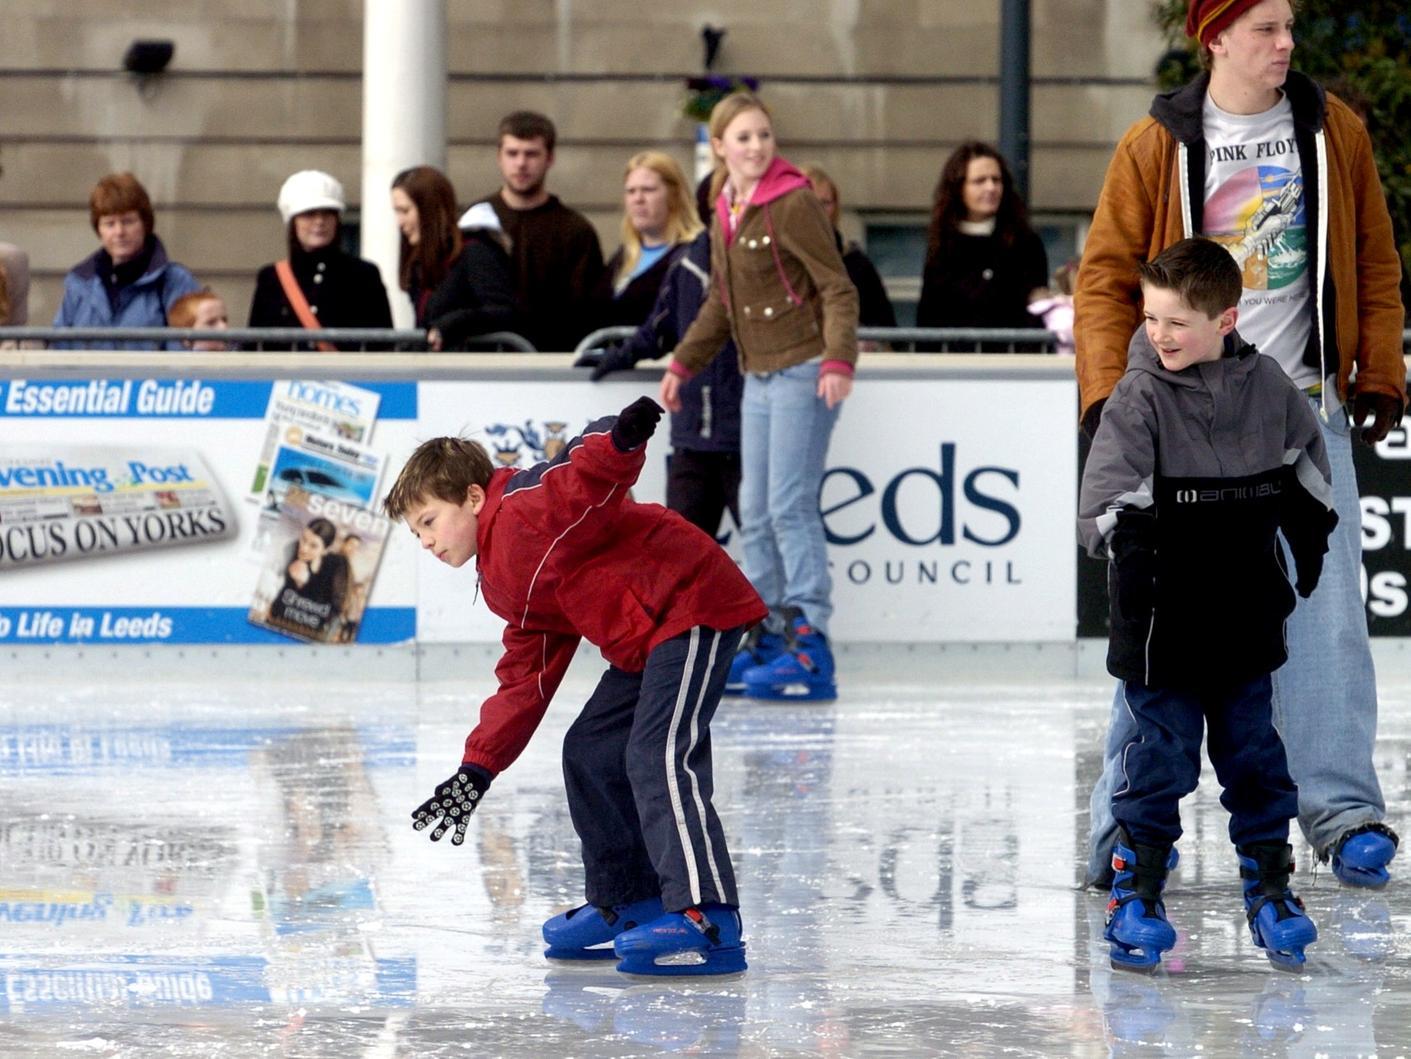 The public enjoy a lunch time skate.